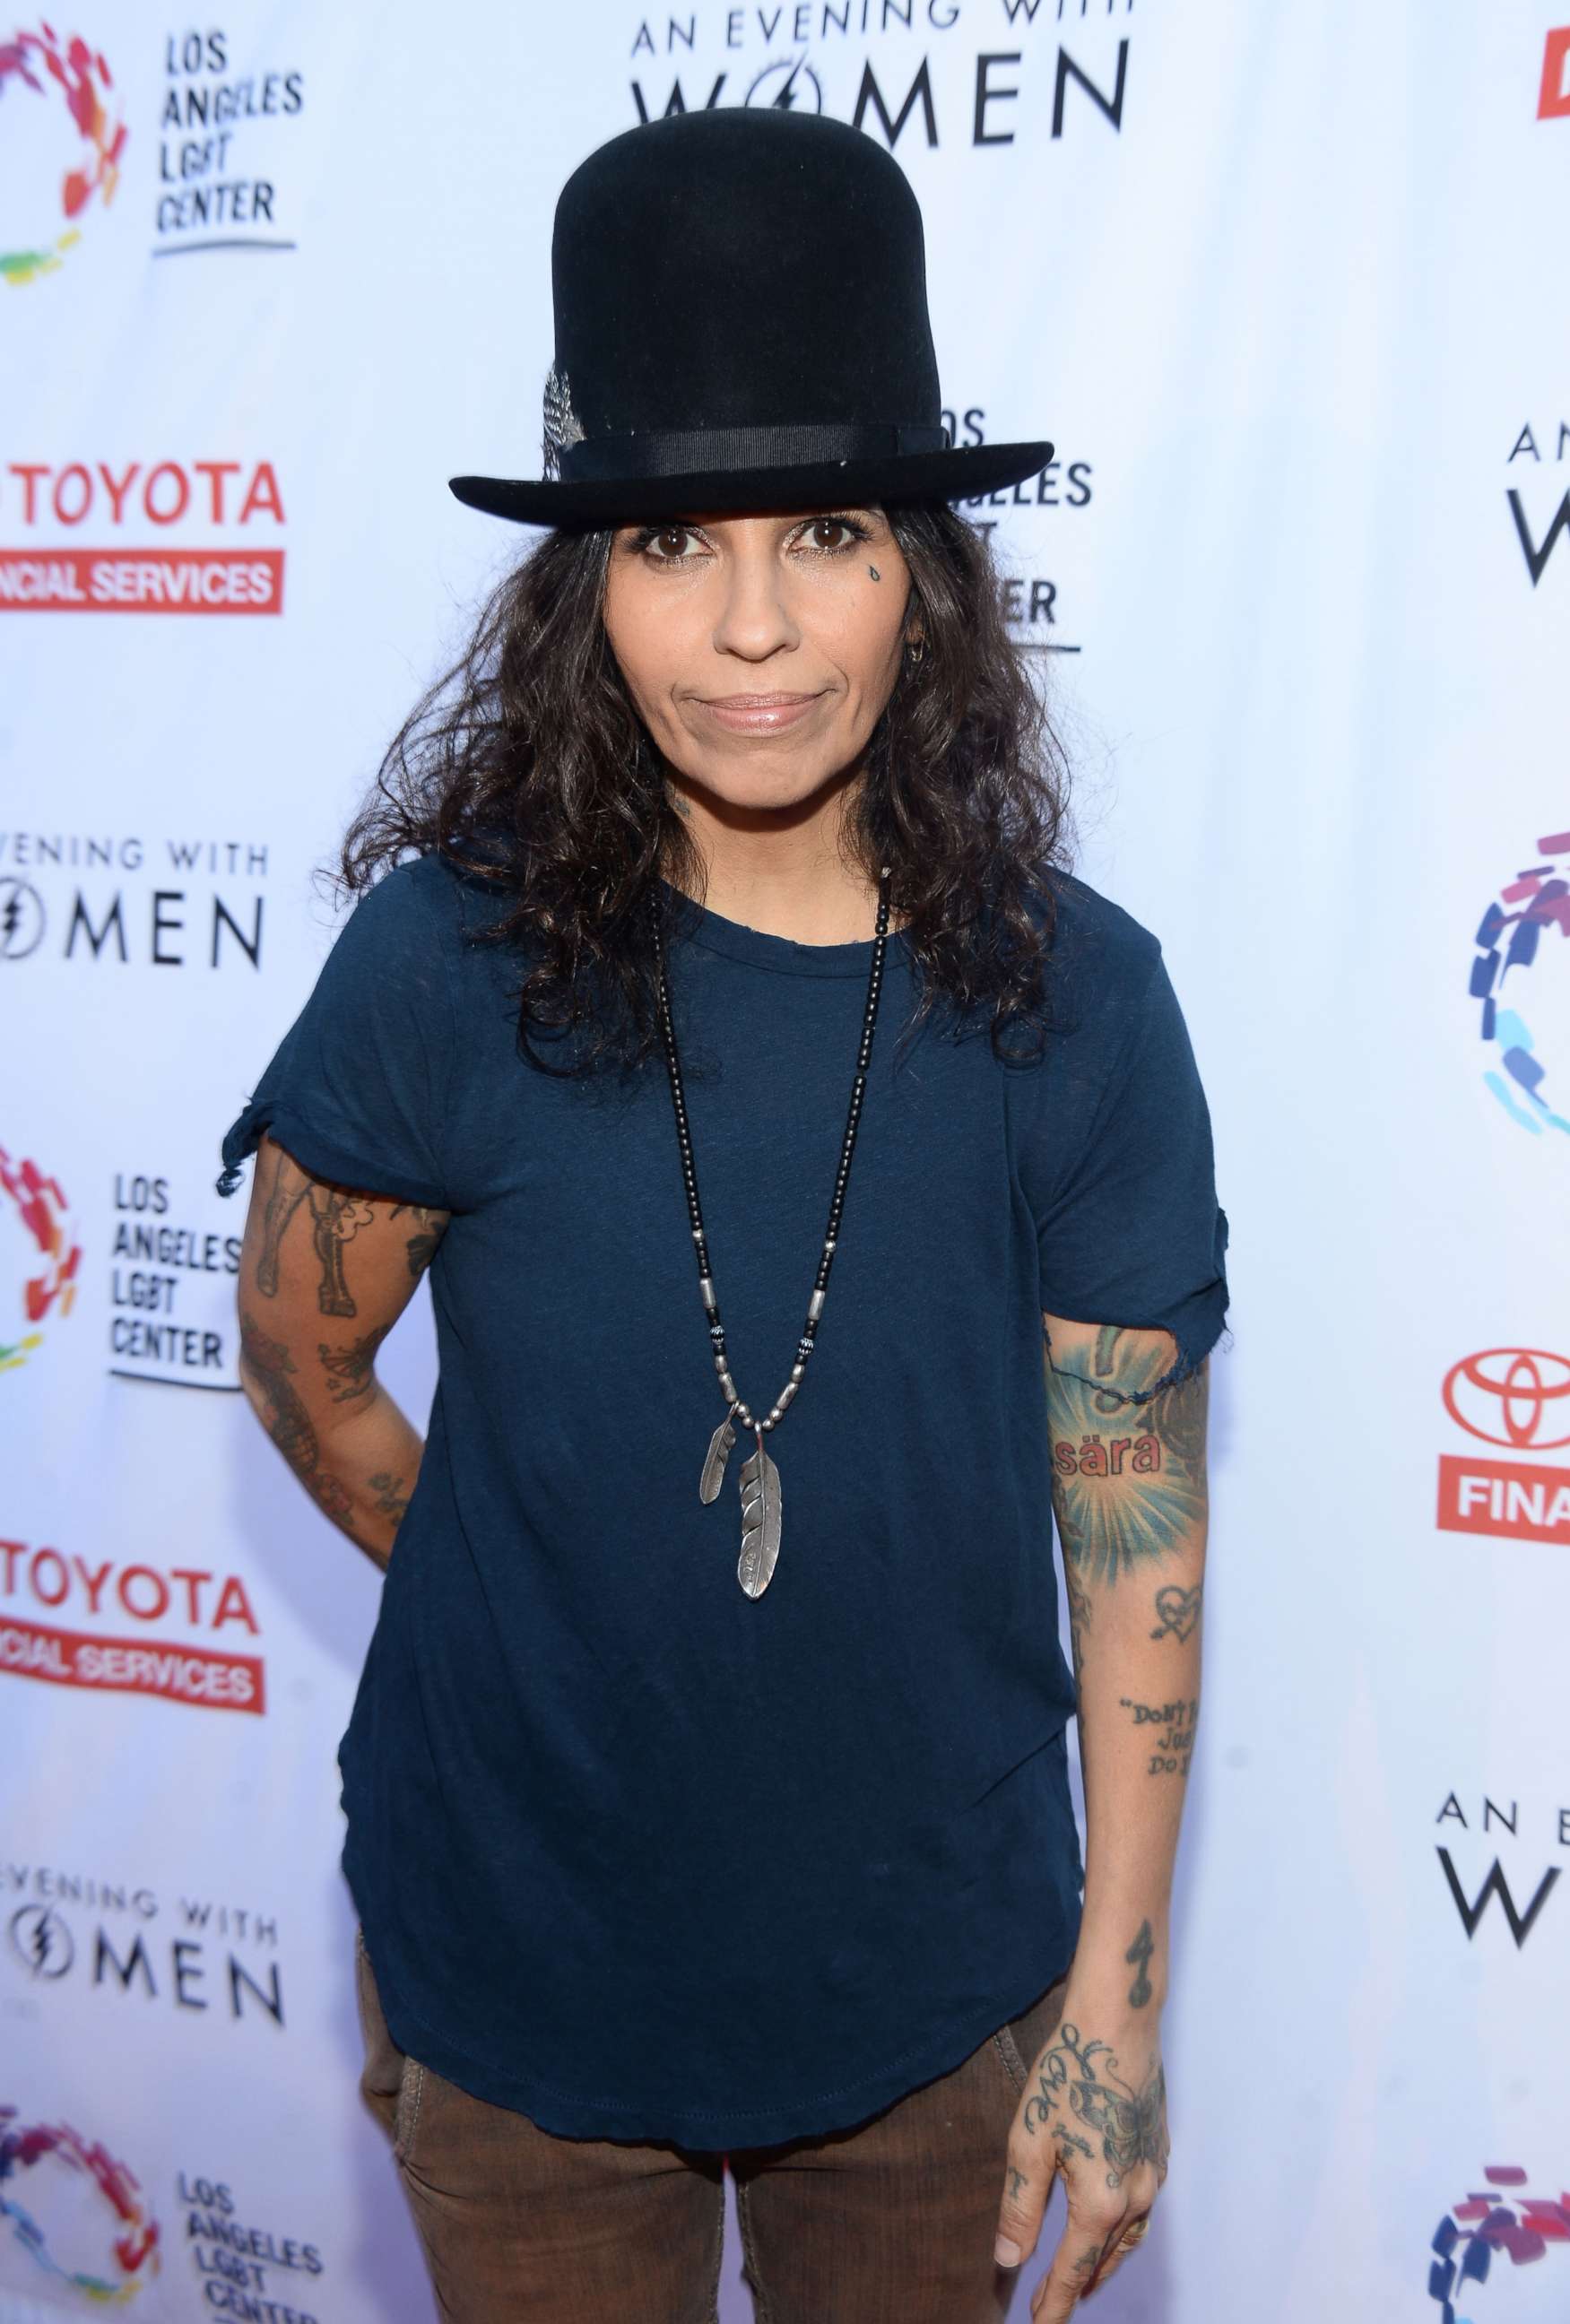 PHOTO: Singer-songwriter Linda Perry attends An Evening with Women benefiting the Los Angeles LGBT Center at the Hollywood Palladium, May 21, 2016 in Los Angeles.